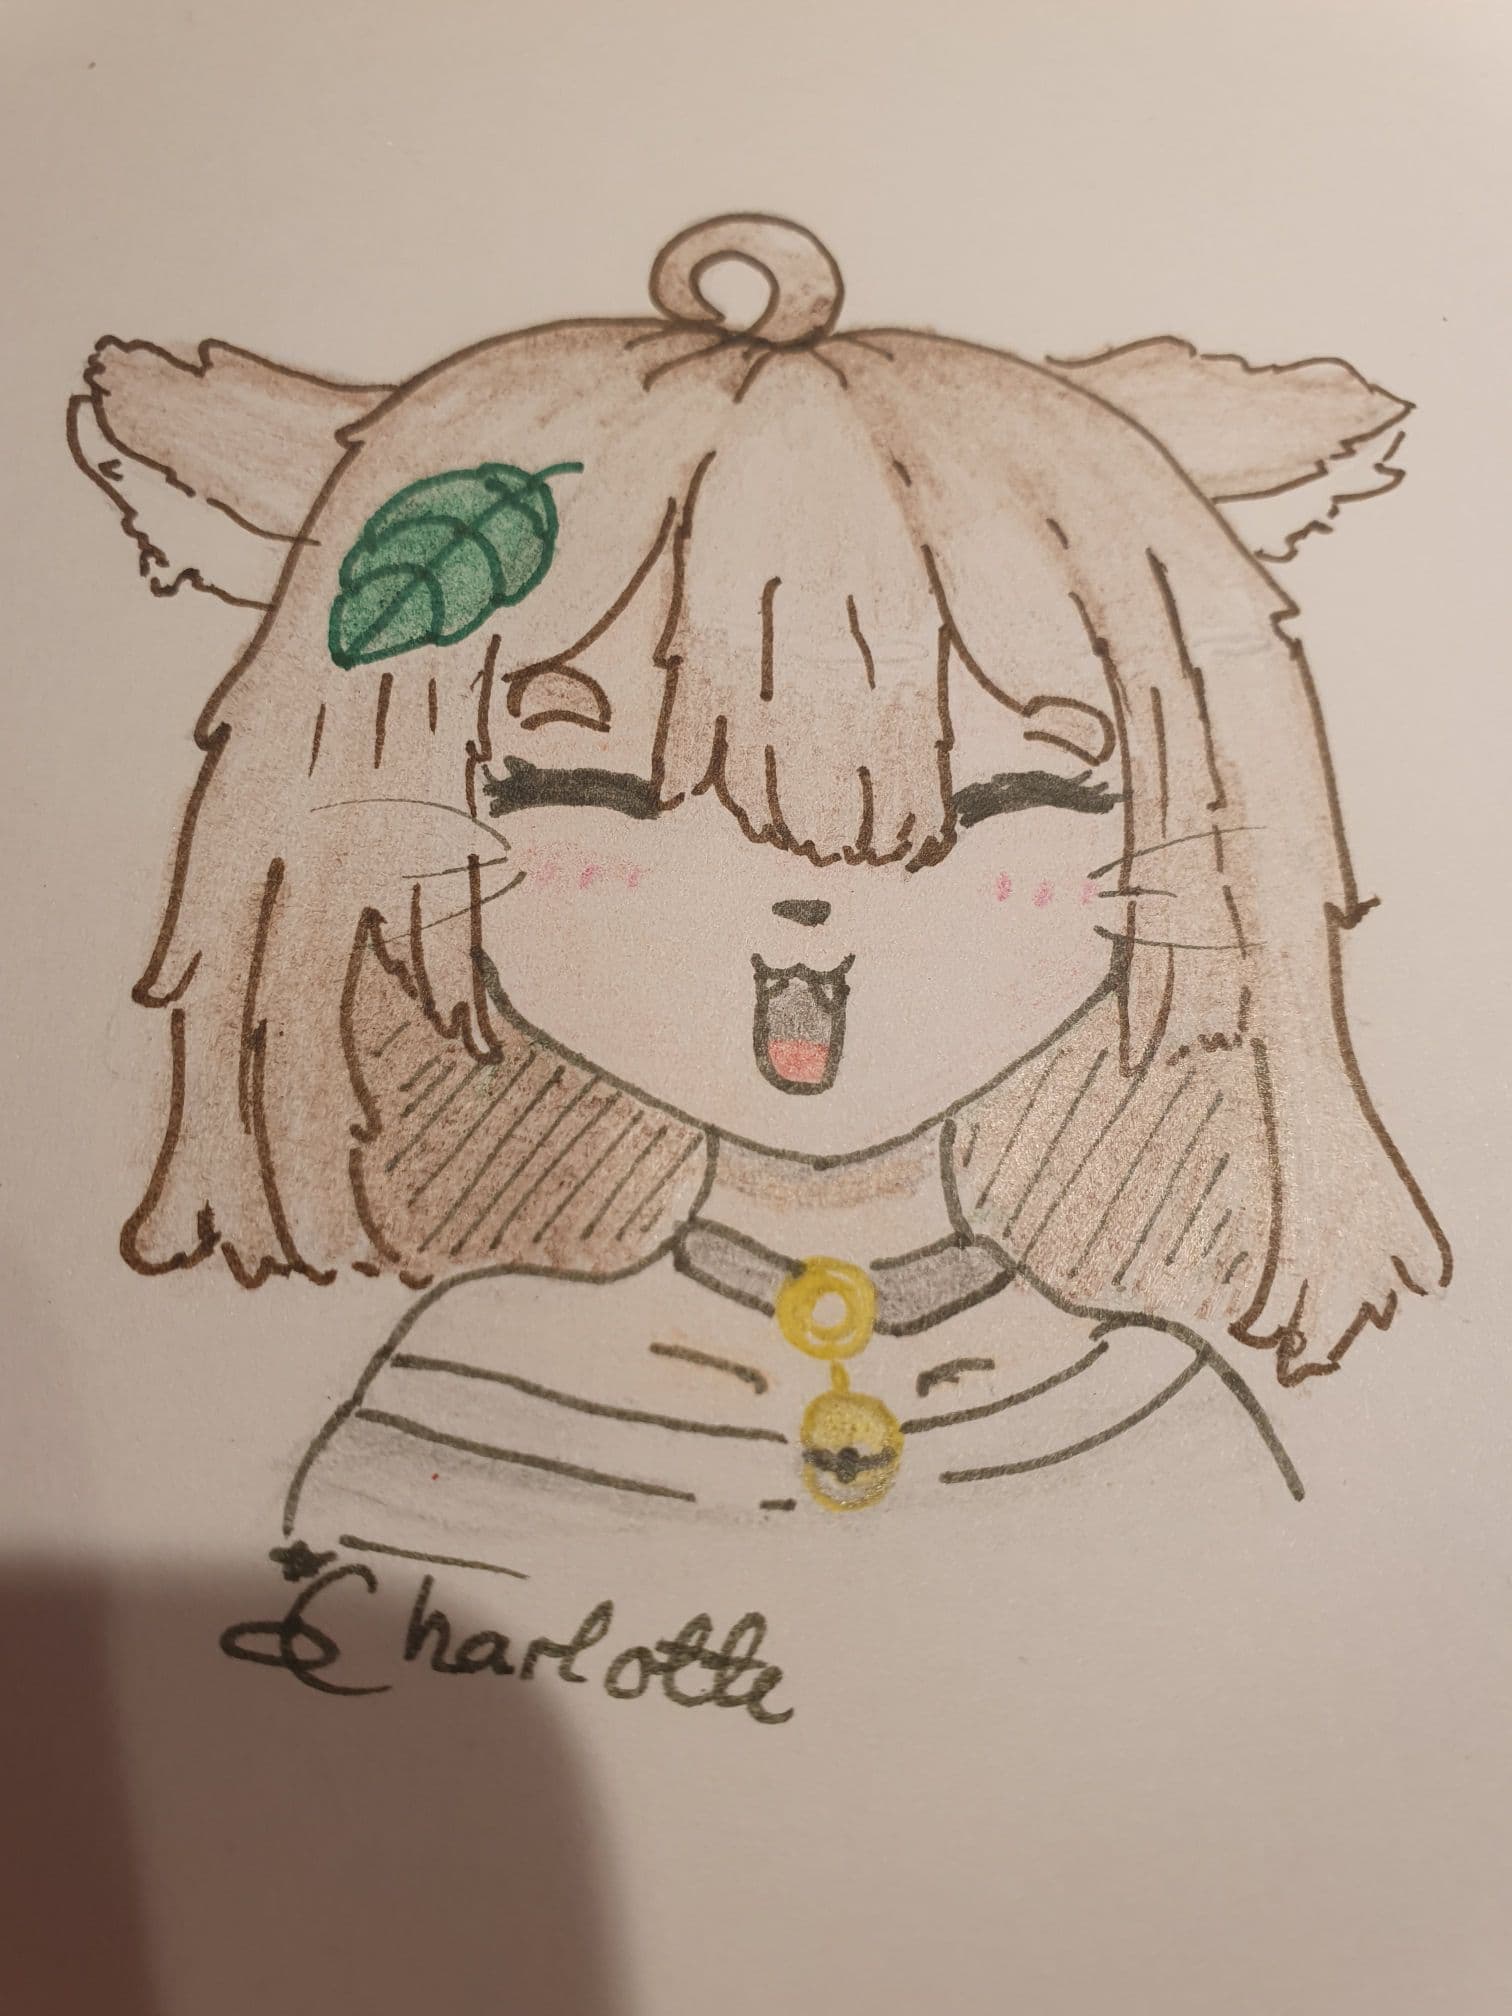 A photo of a drawing of a smiling, brown-haired catgirl with a realistic basil leaf in her hair. She's wearing a cat collar with a bell, and a gray off-the-shoulder top.